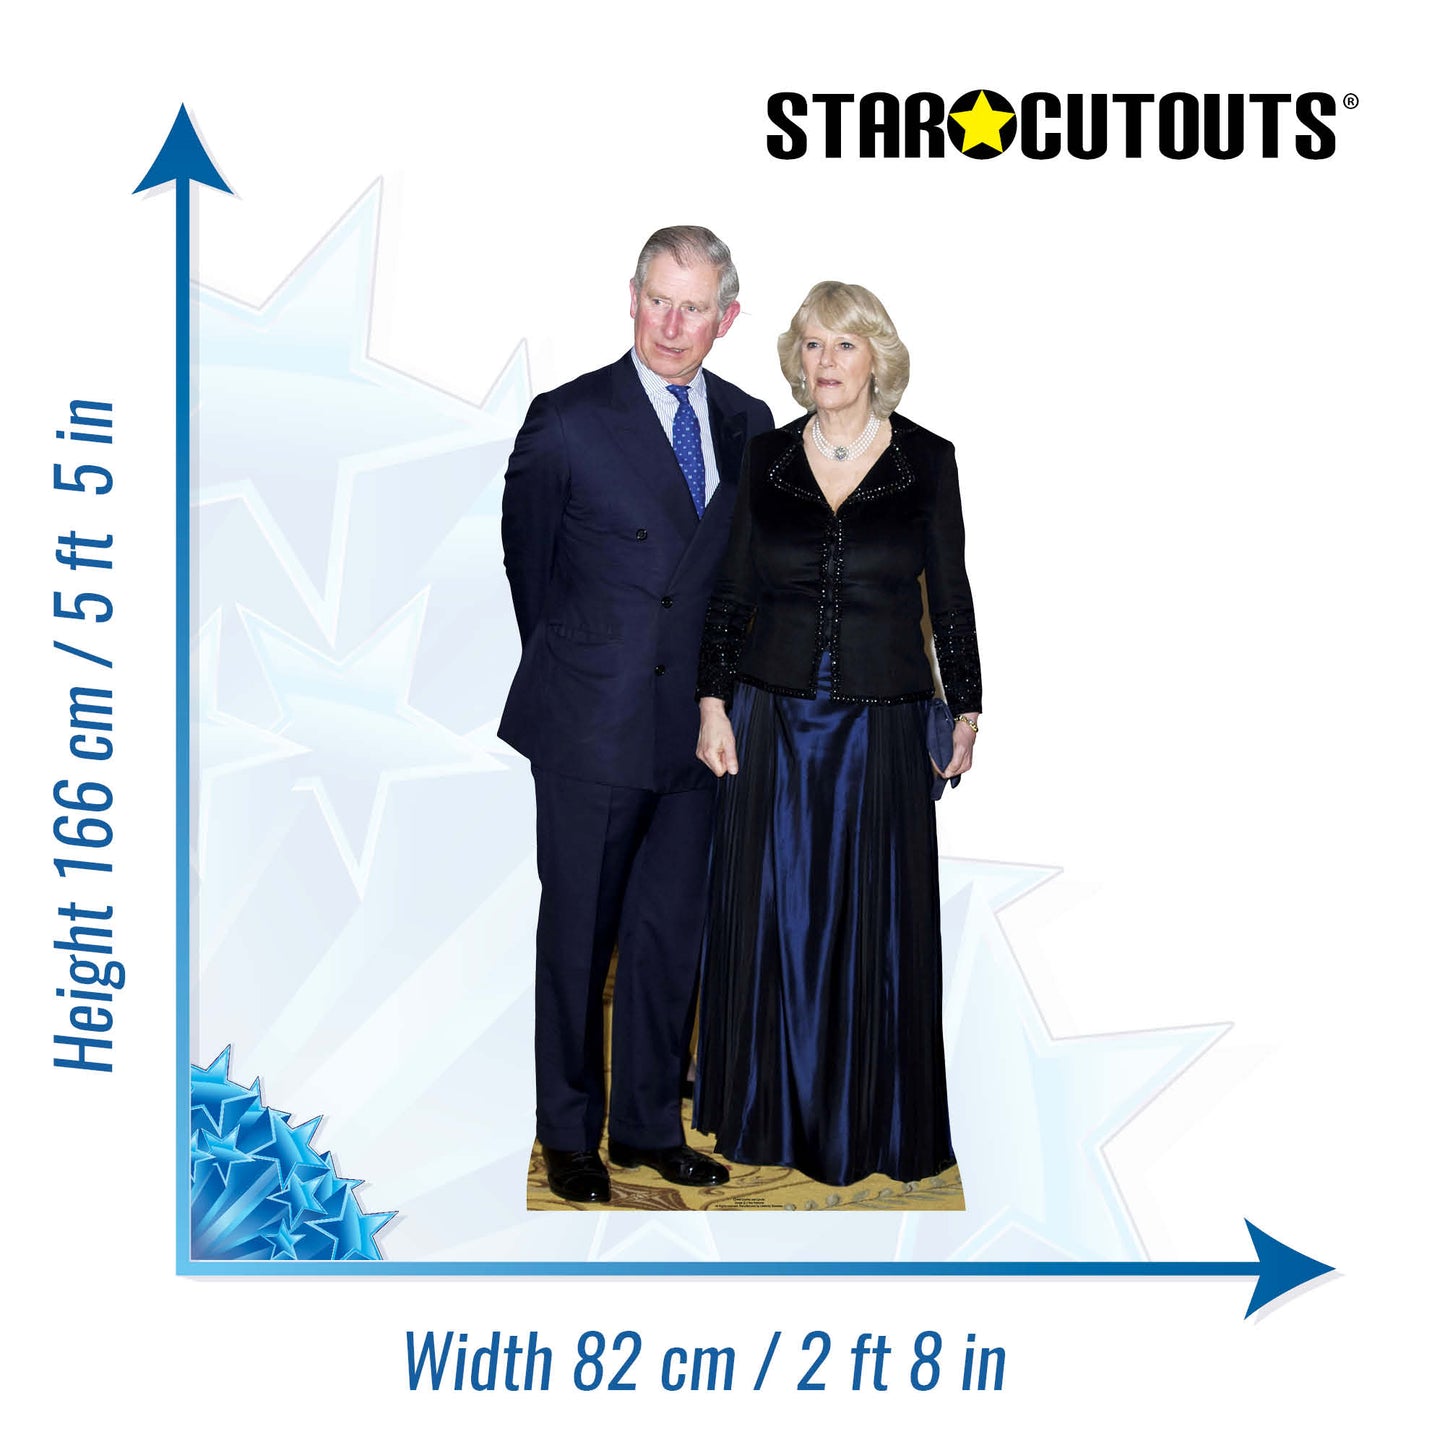 King Charles and Camilla The Queen Consort Cardboard Cutout